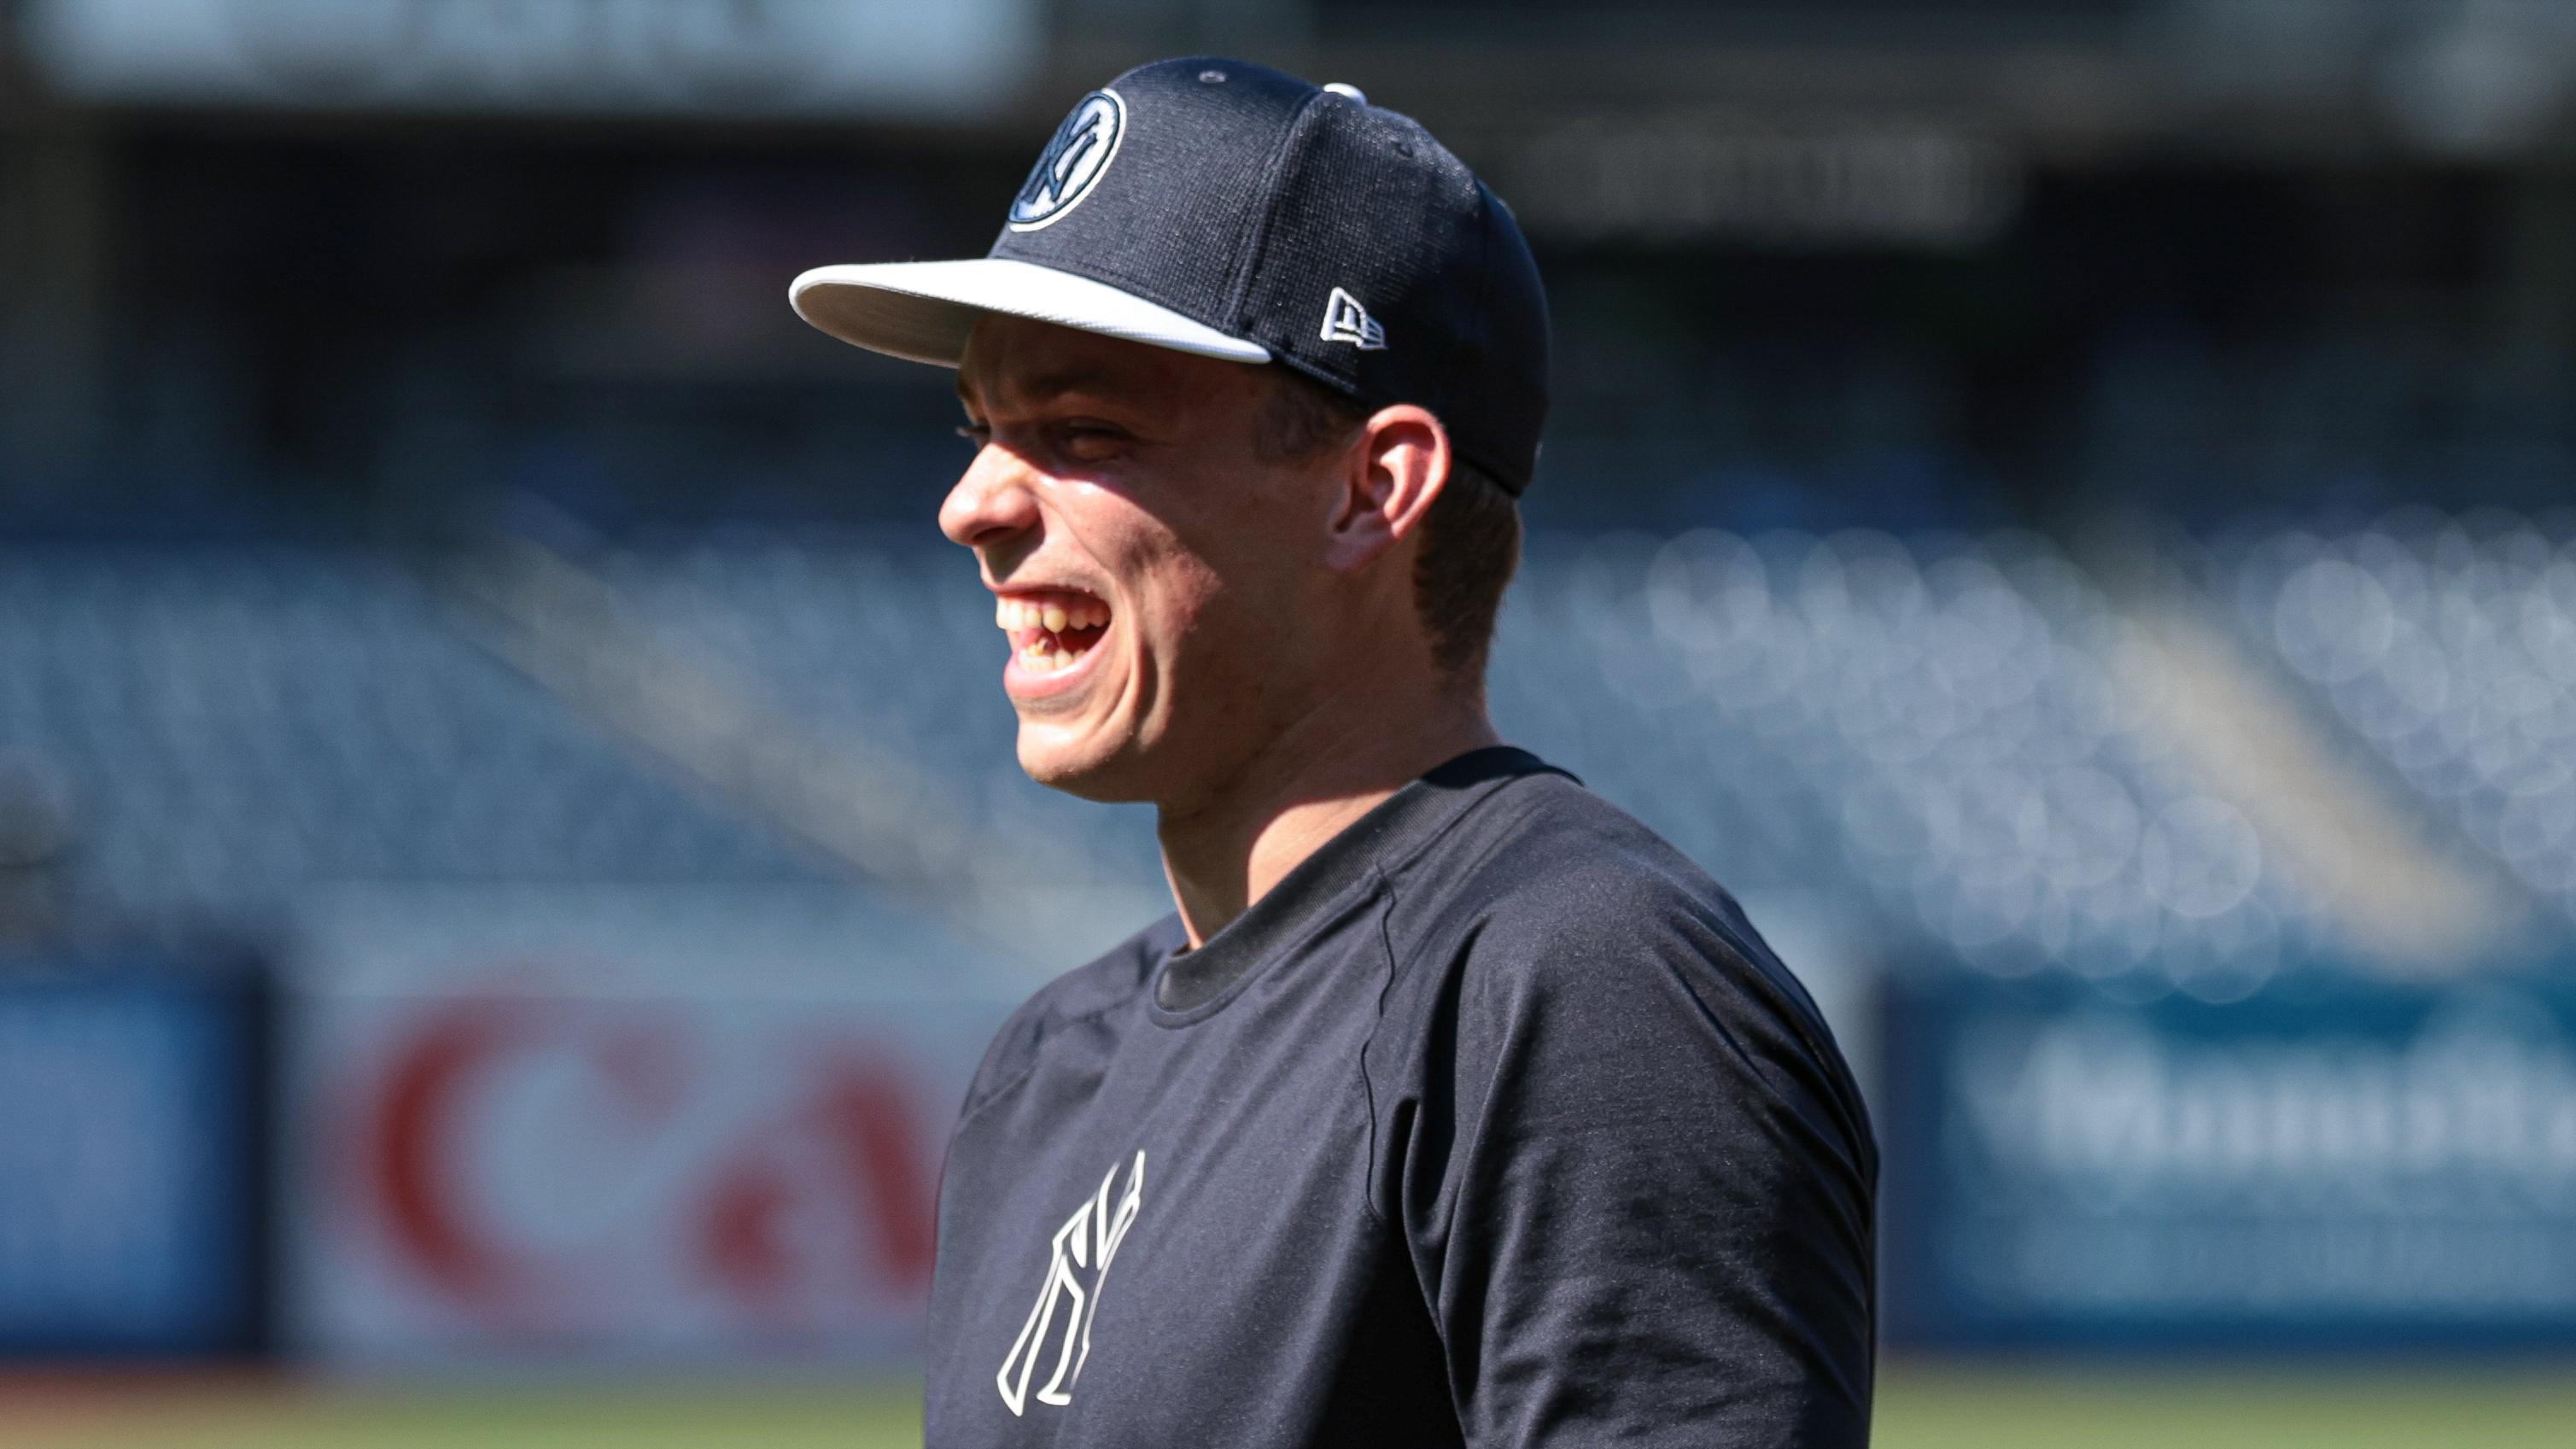 New York Yankees first baseman Ben Rice (93) on the field before the game against the Baltimore Orioles at Yankee Stadium